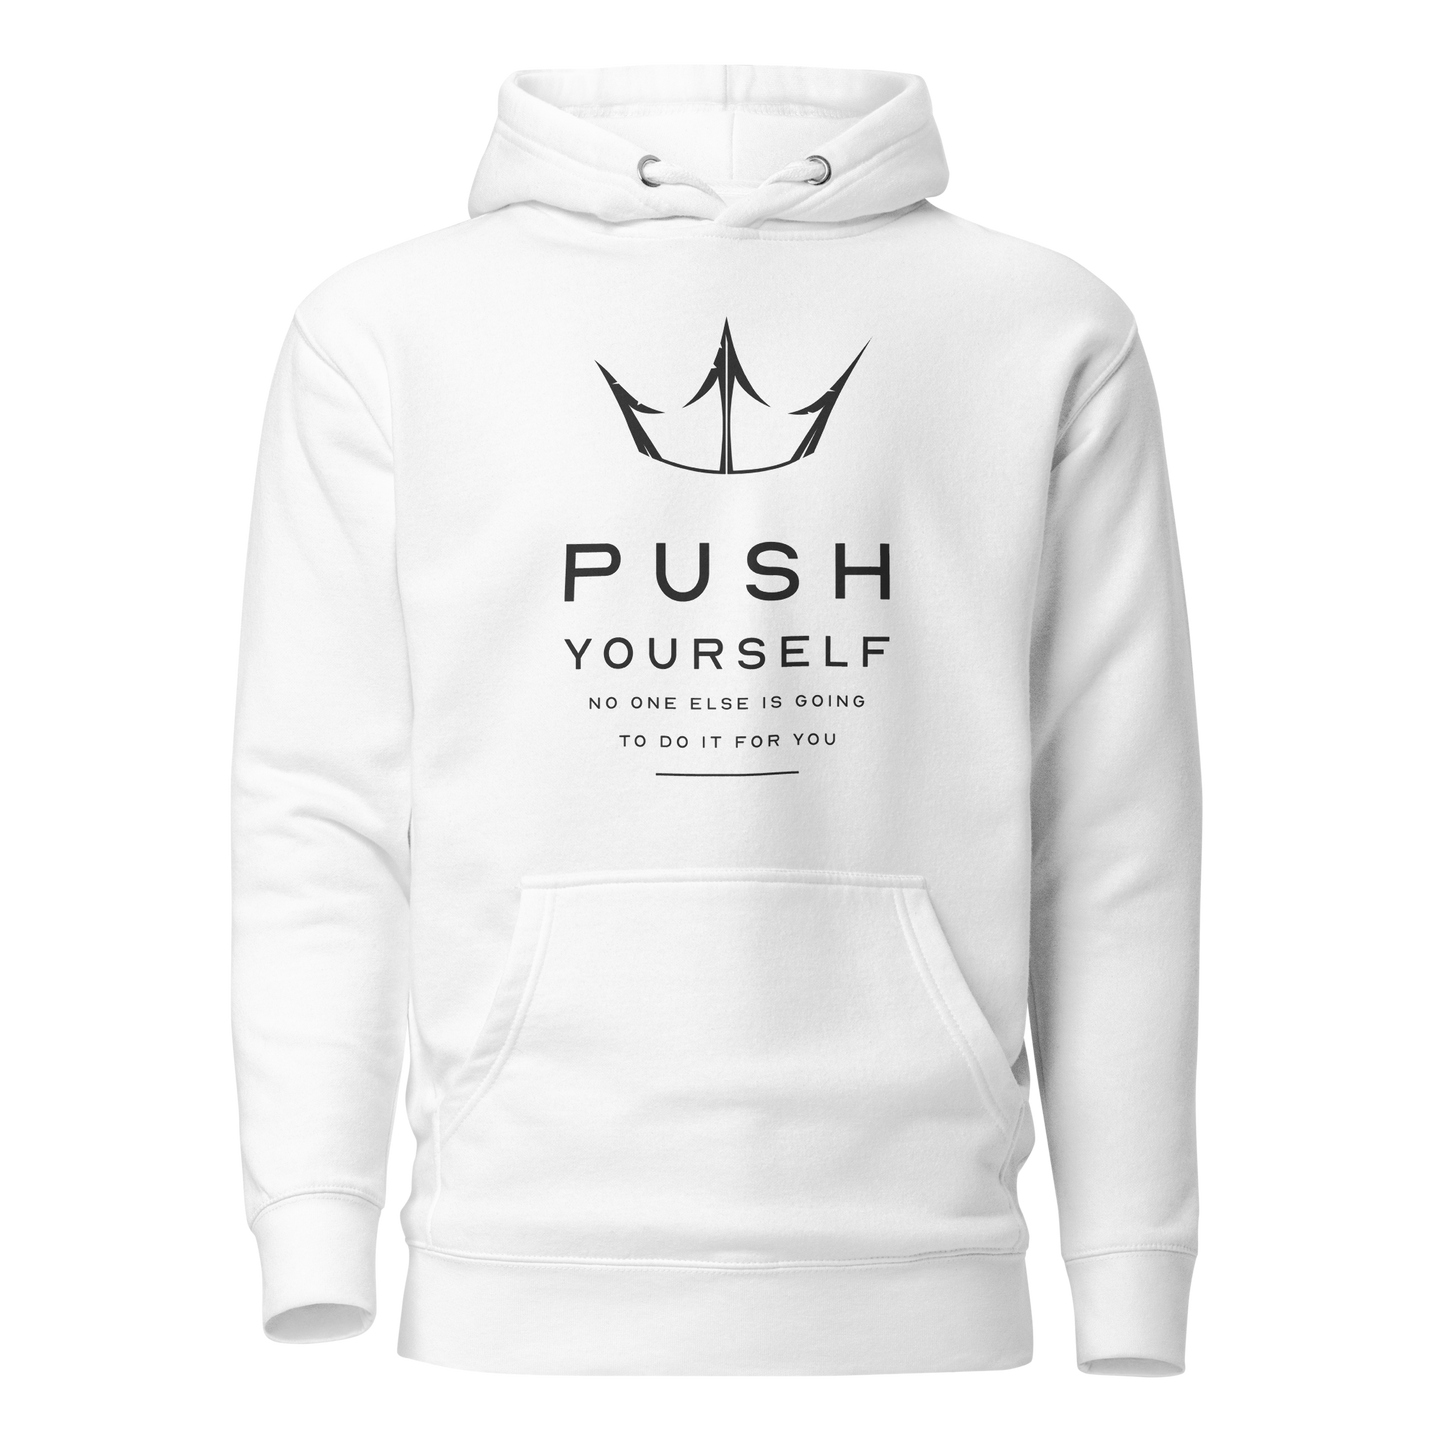 Push Yourself No One Else Is Going To Do It For You